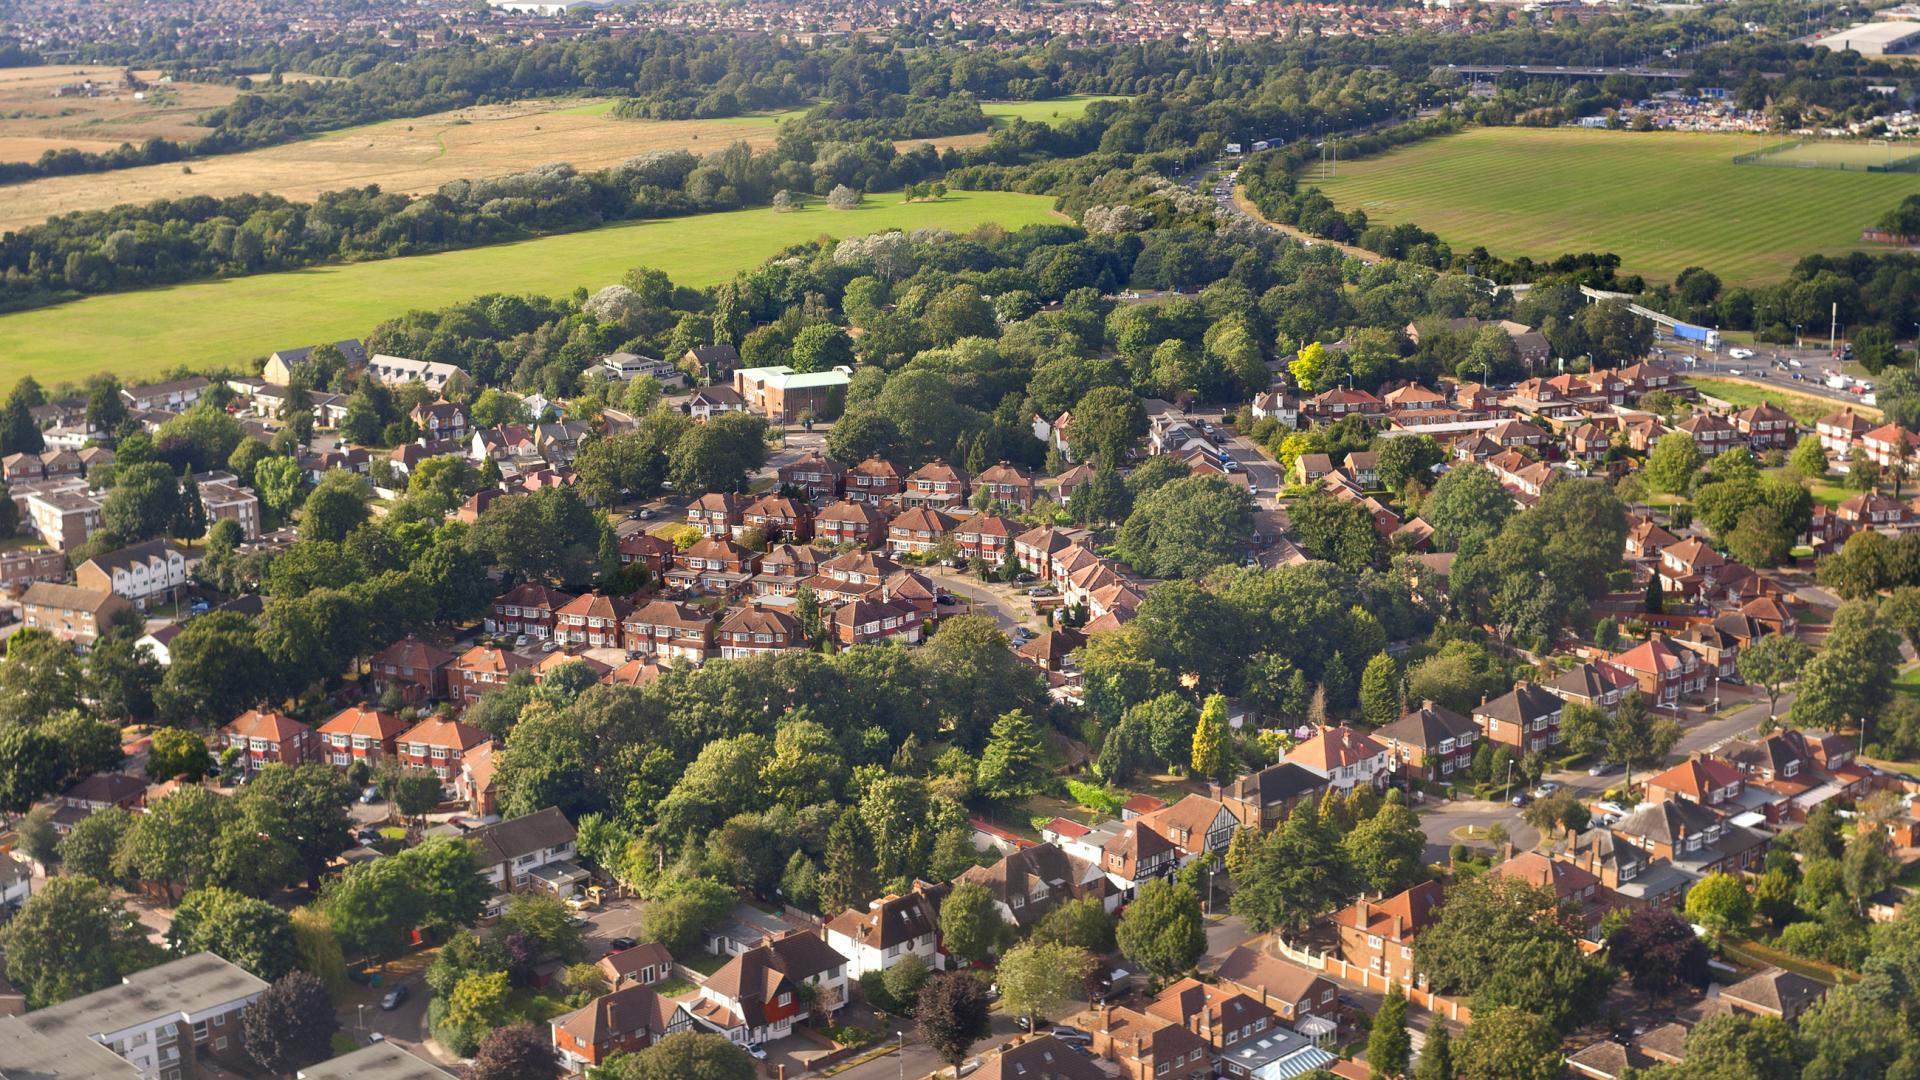 An aerial view of houses and trees